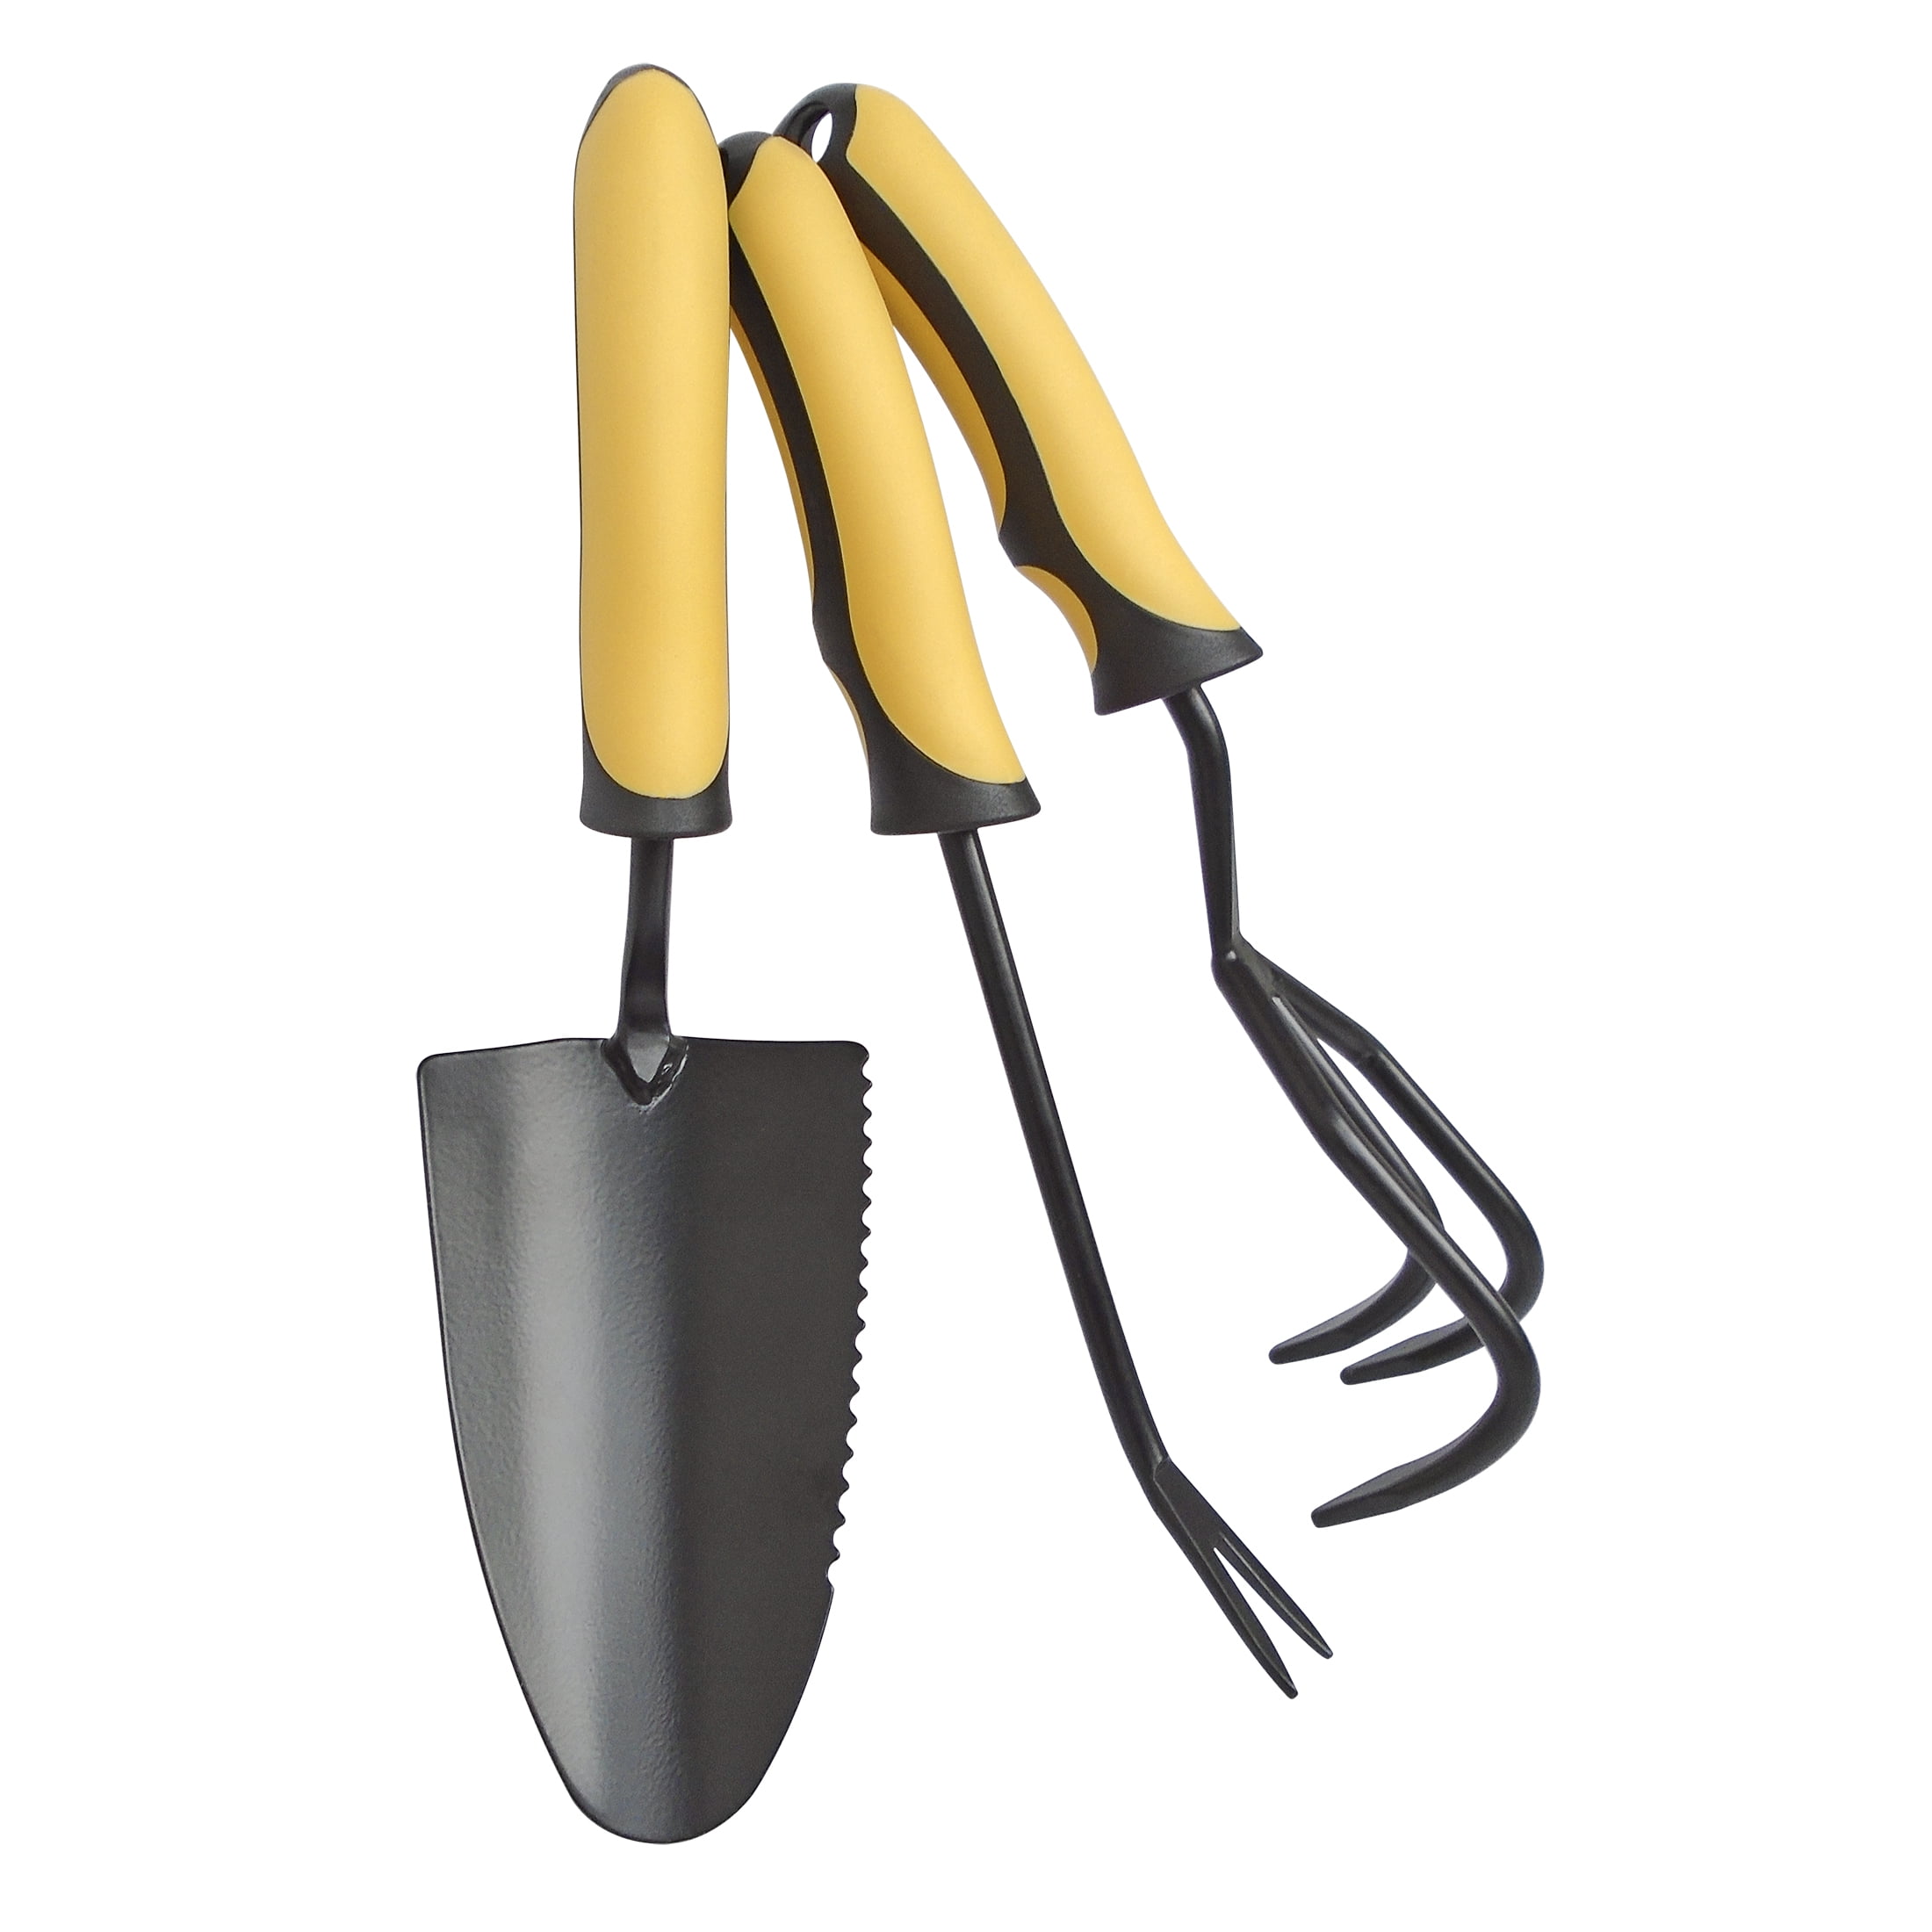 HOUSEHOLD TOOL PLANT SET  3 Pieces Trowel,Cultivator,Spade 